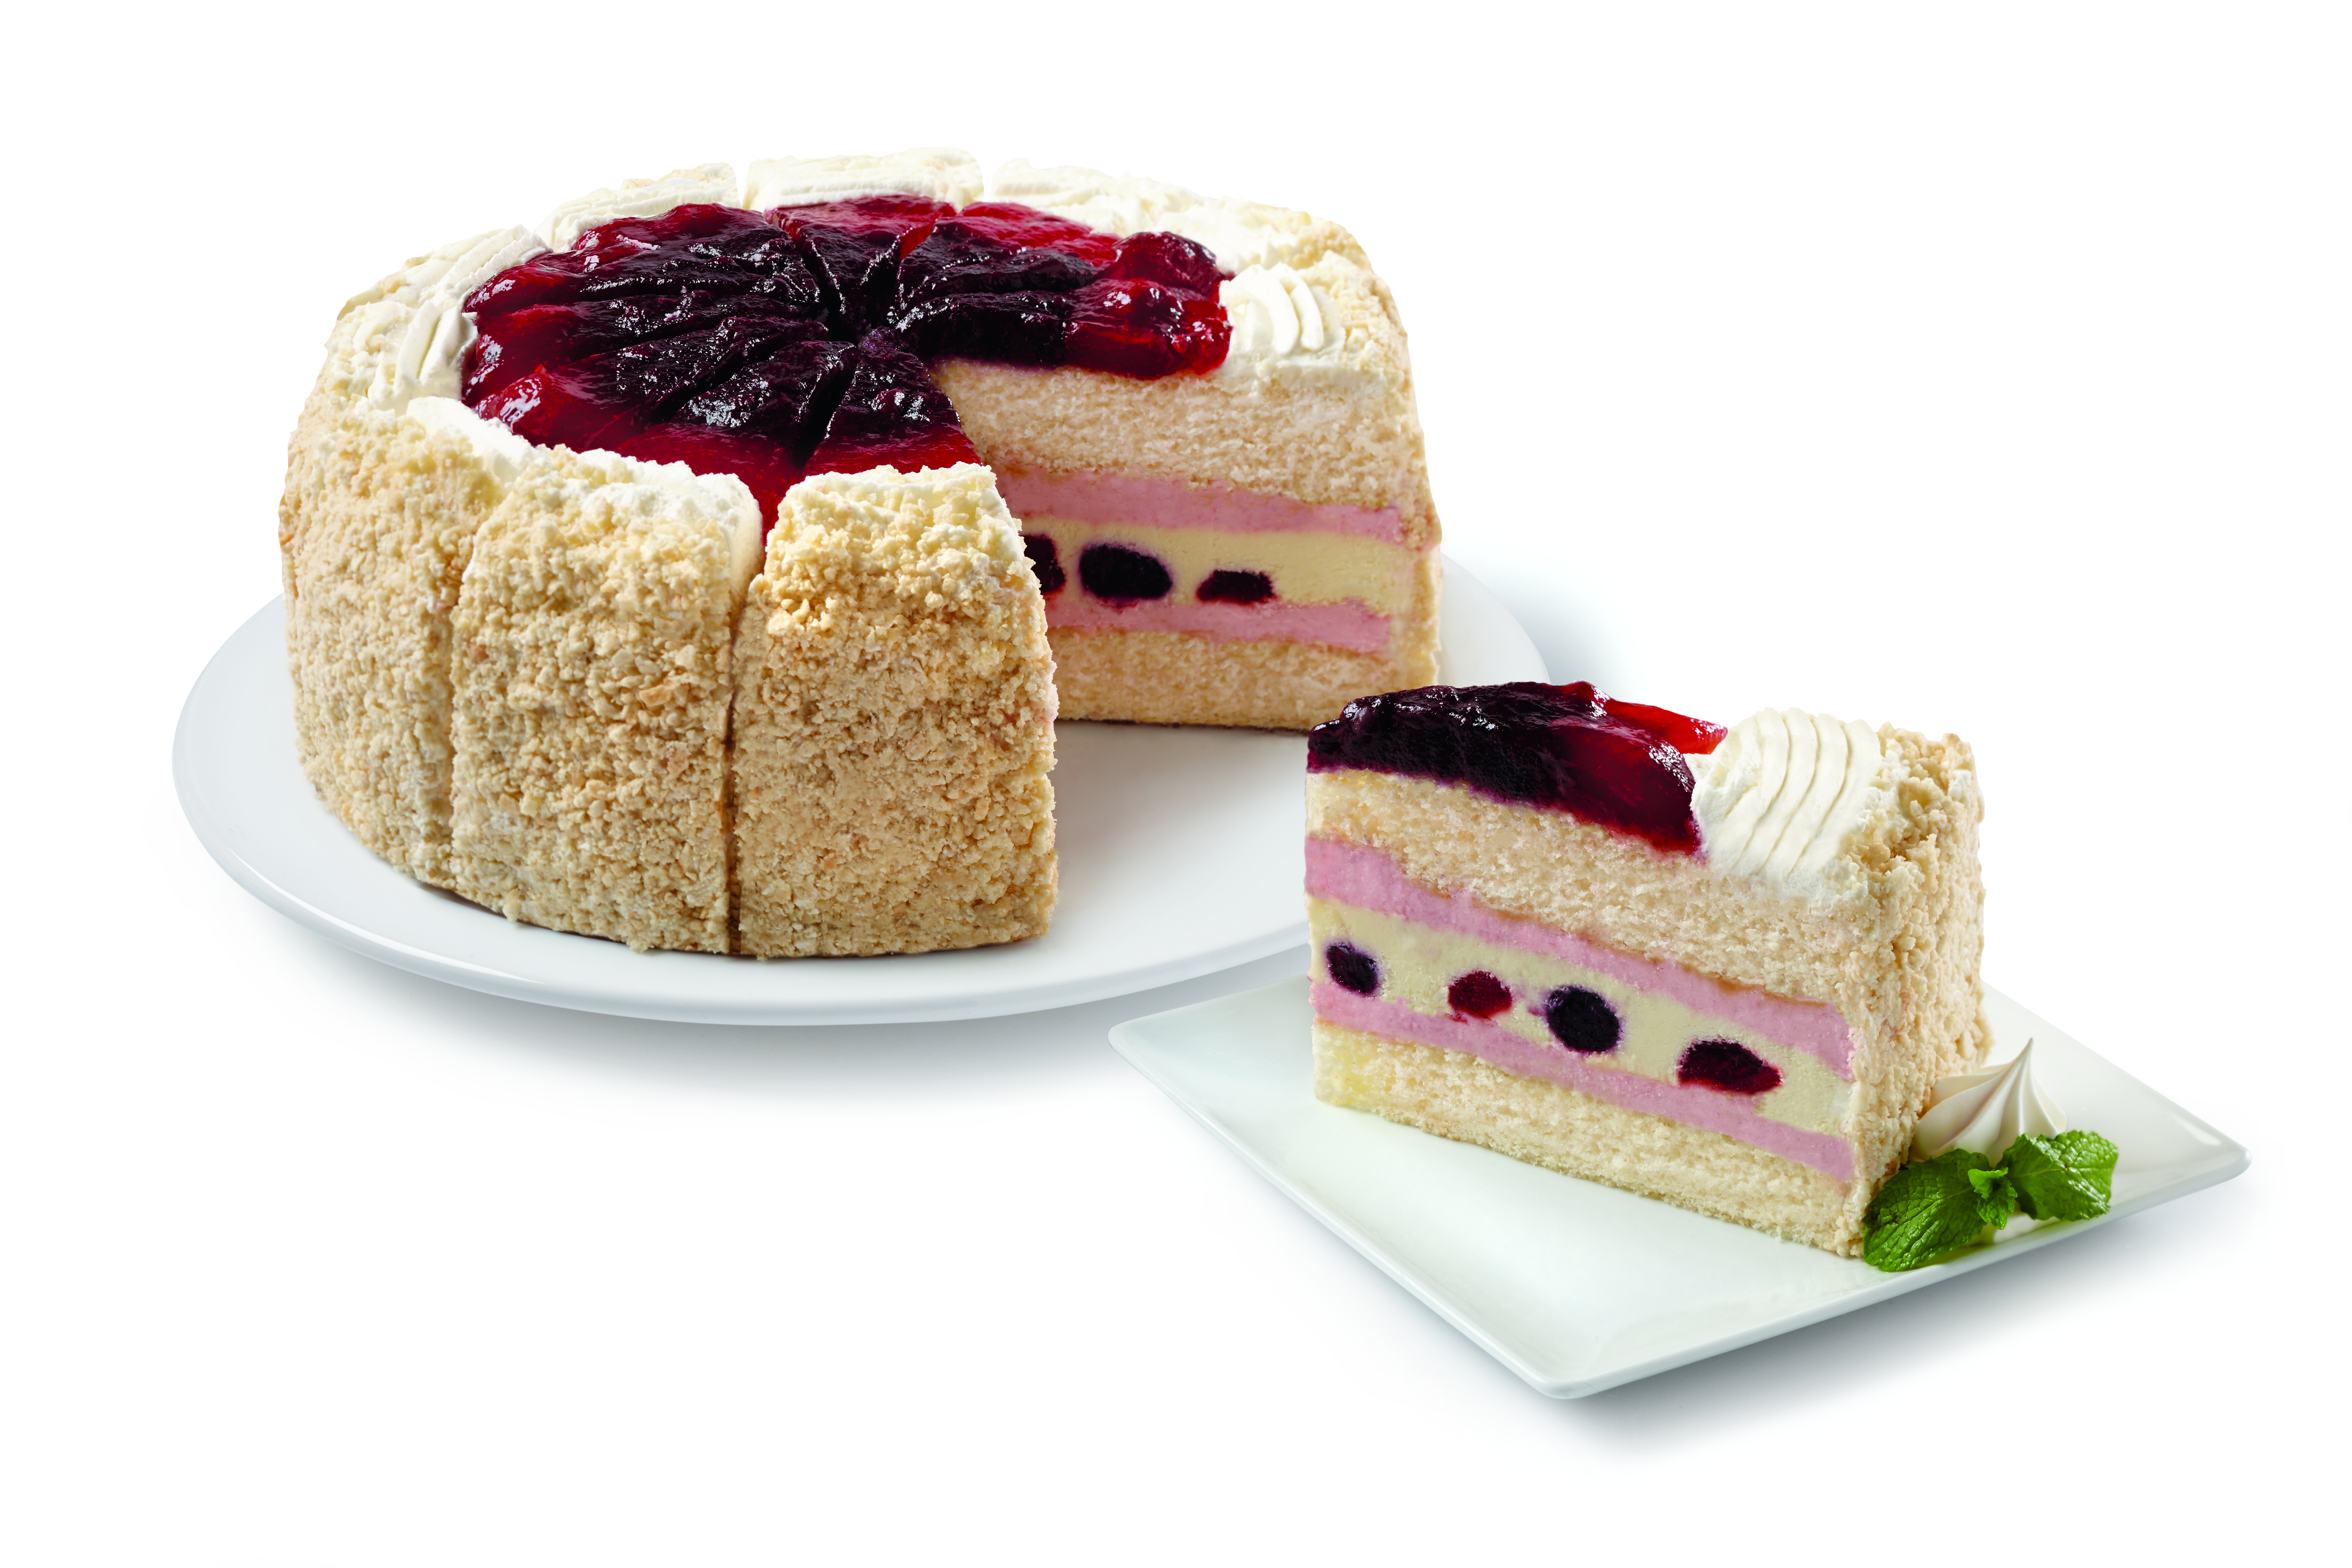 The Cheesecake Factory Bakery ® 10" Cheesecake - All-American.